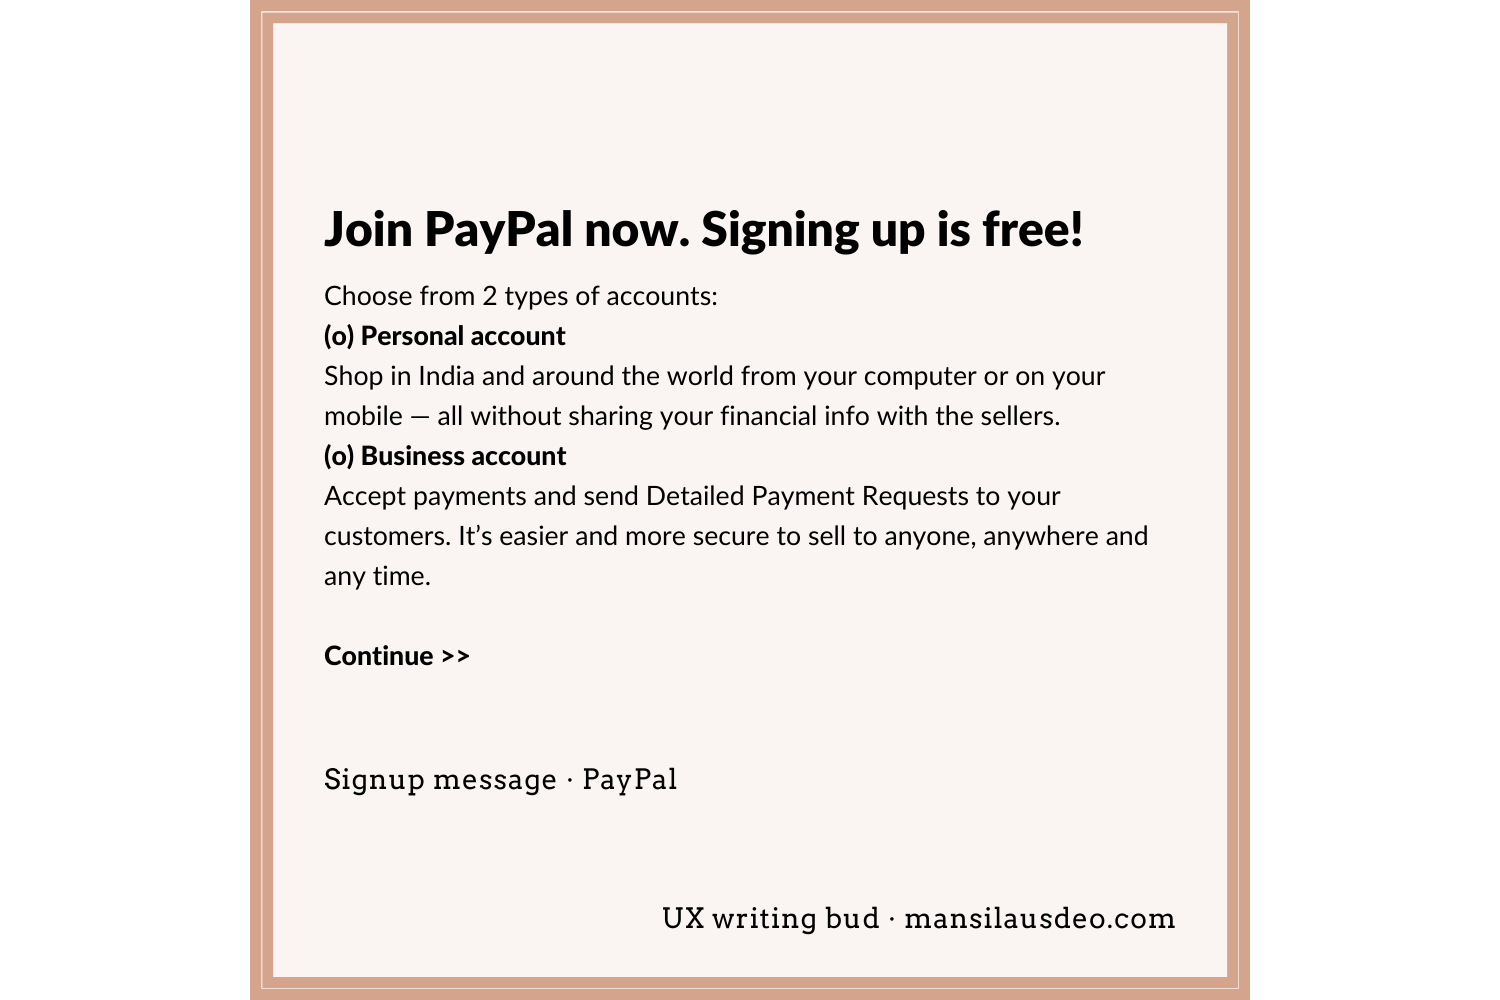 Join PayPal now. Signing up is free! Choose from 2 types of accounts: (o) Personal account Shop in India and around the world from your computer or on your mobile — all without sharing your financial info with the sellers. (o) Business account Accept payments and send Detailed Payment Requests to your customers. It’s easier and more secure to sell to anyone, anywhere and any time. Continue >> Signup form • PayPal UX writing bud